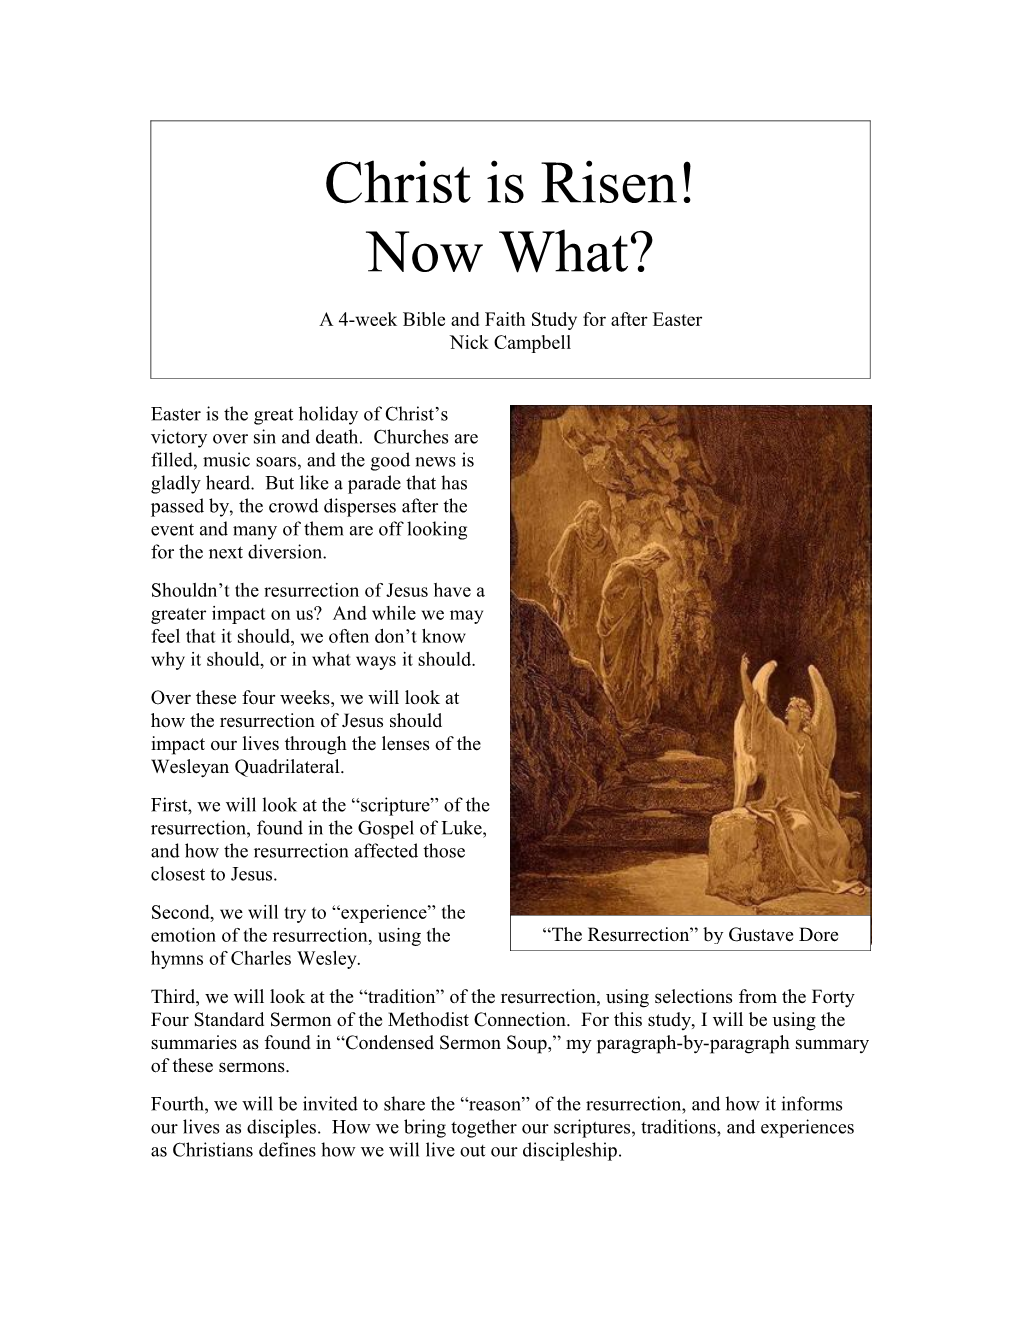 Christ Is Risen: Now What